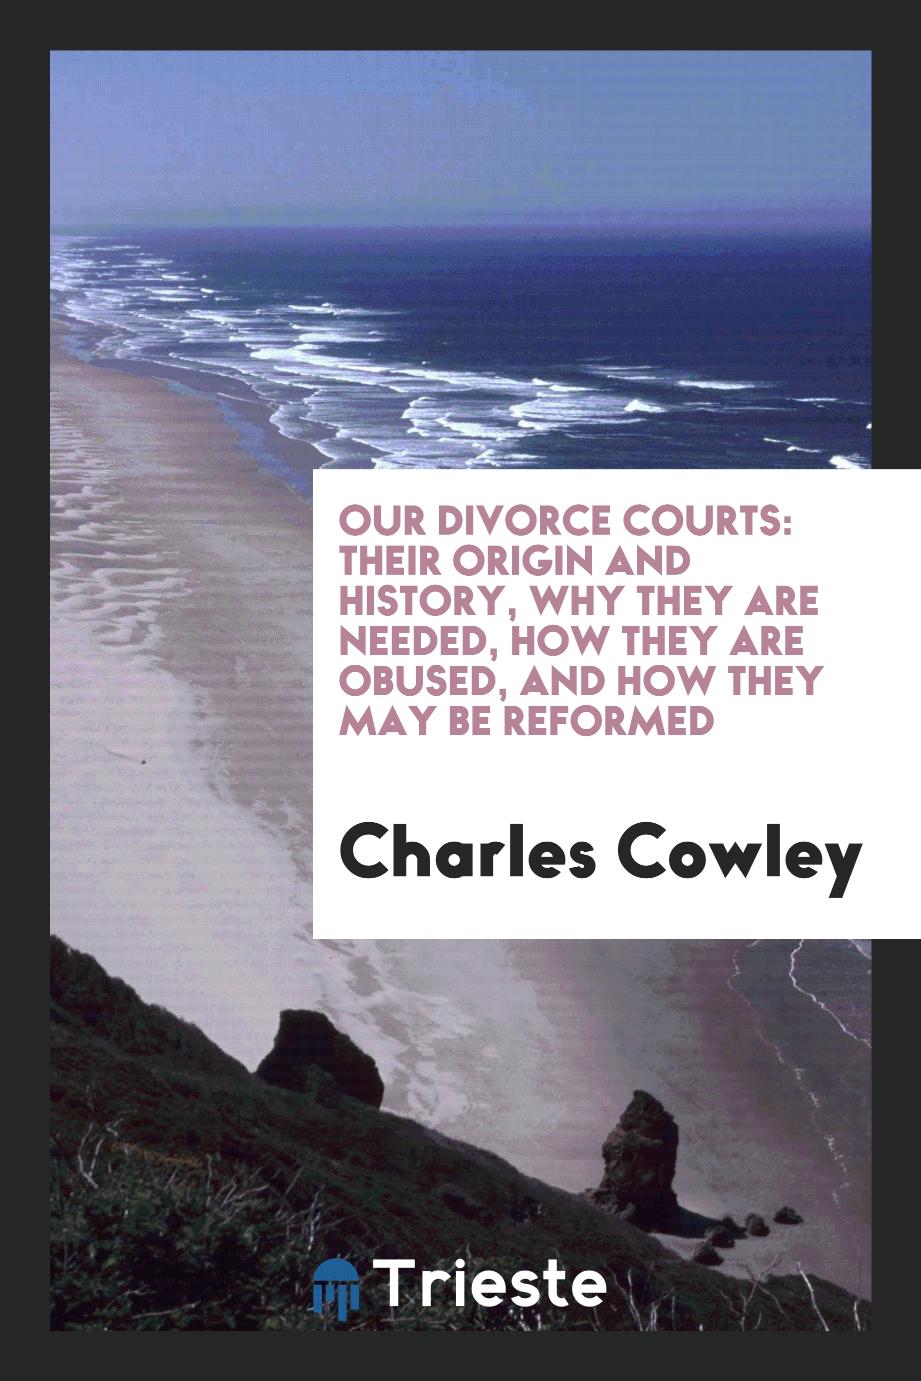 Our Divorce Courts: Their Origin and History, why They are Needed, how They are obused, and how they may be reformed